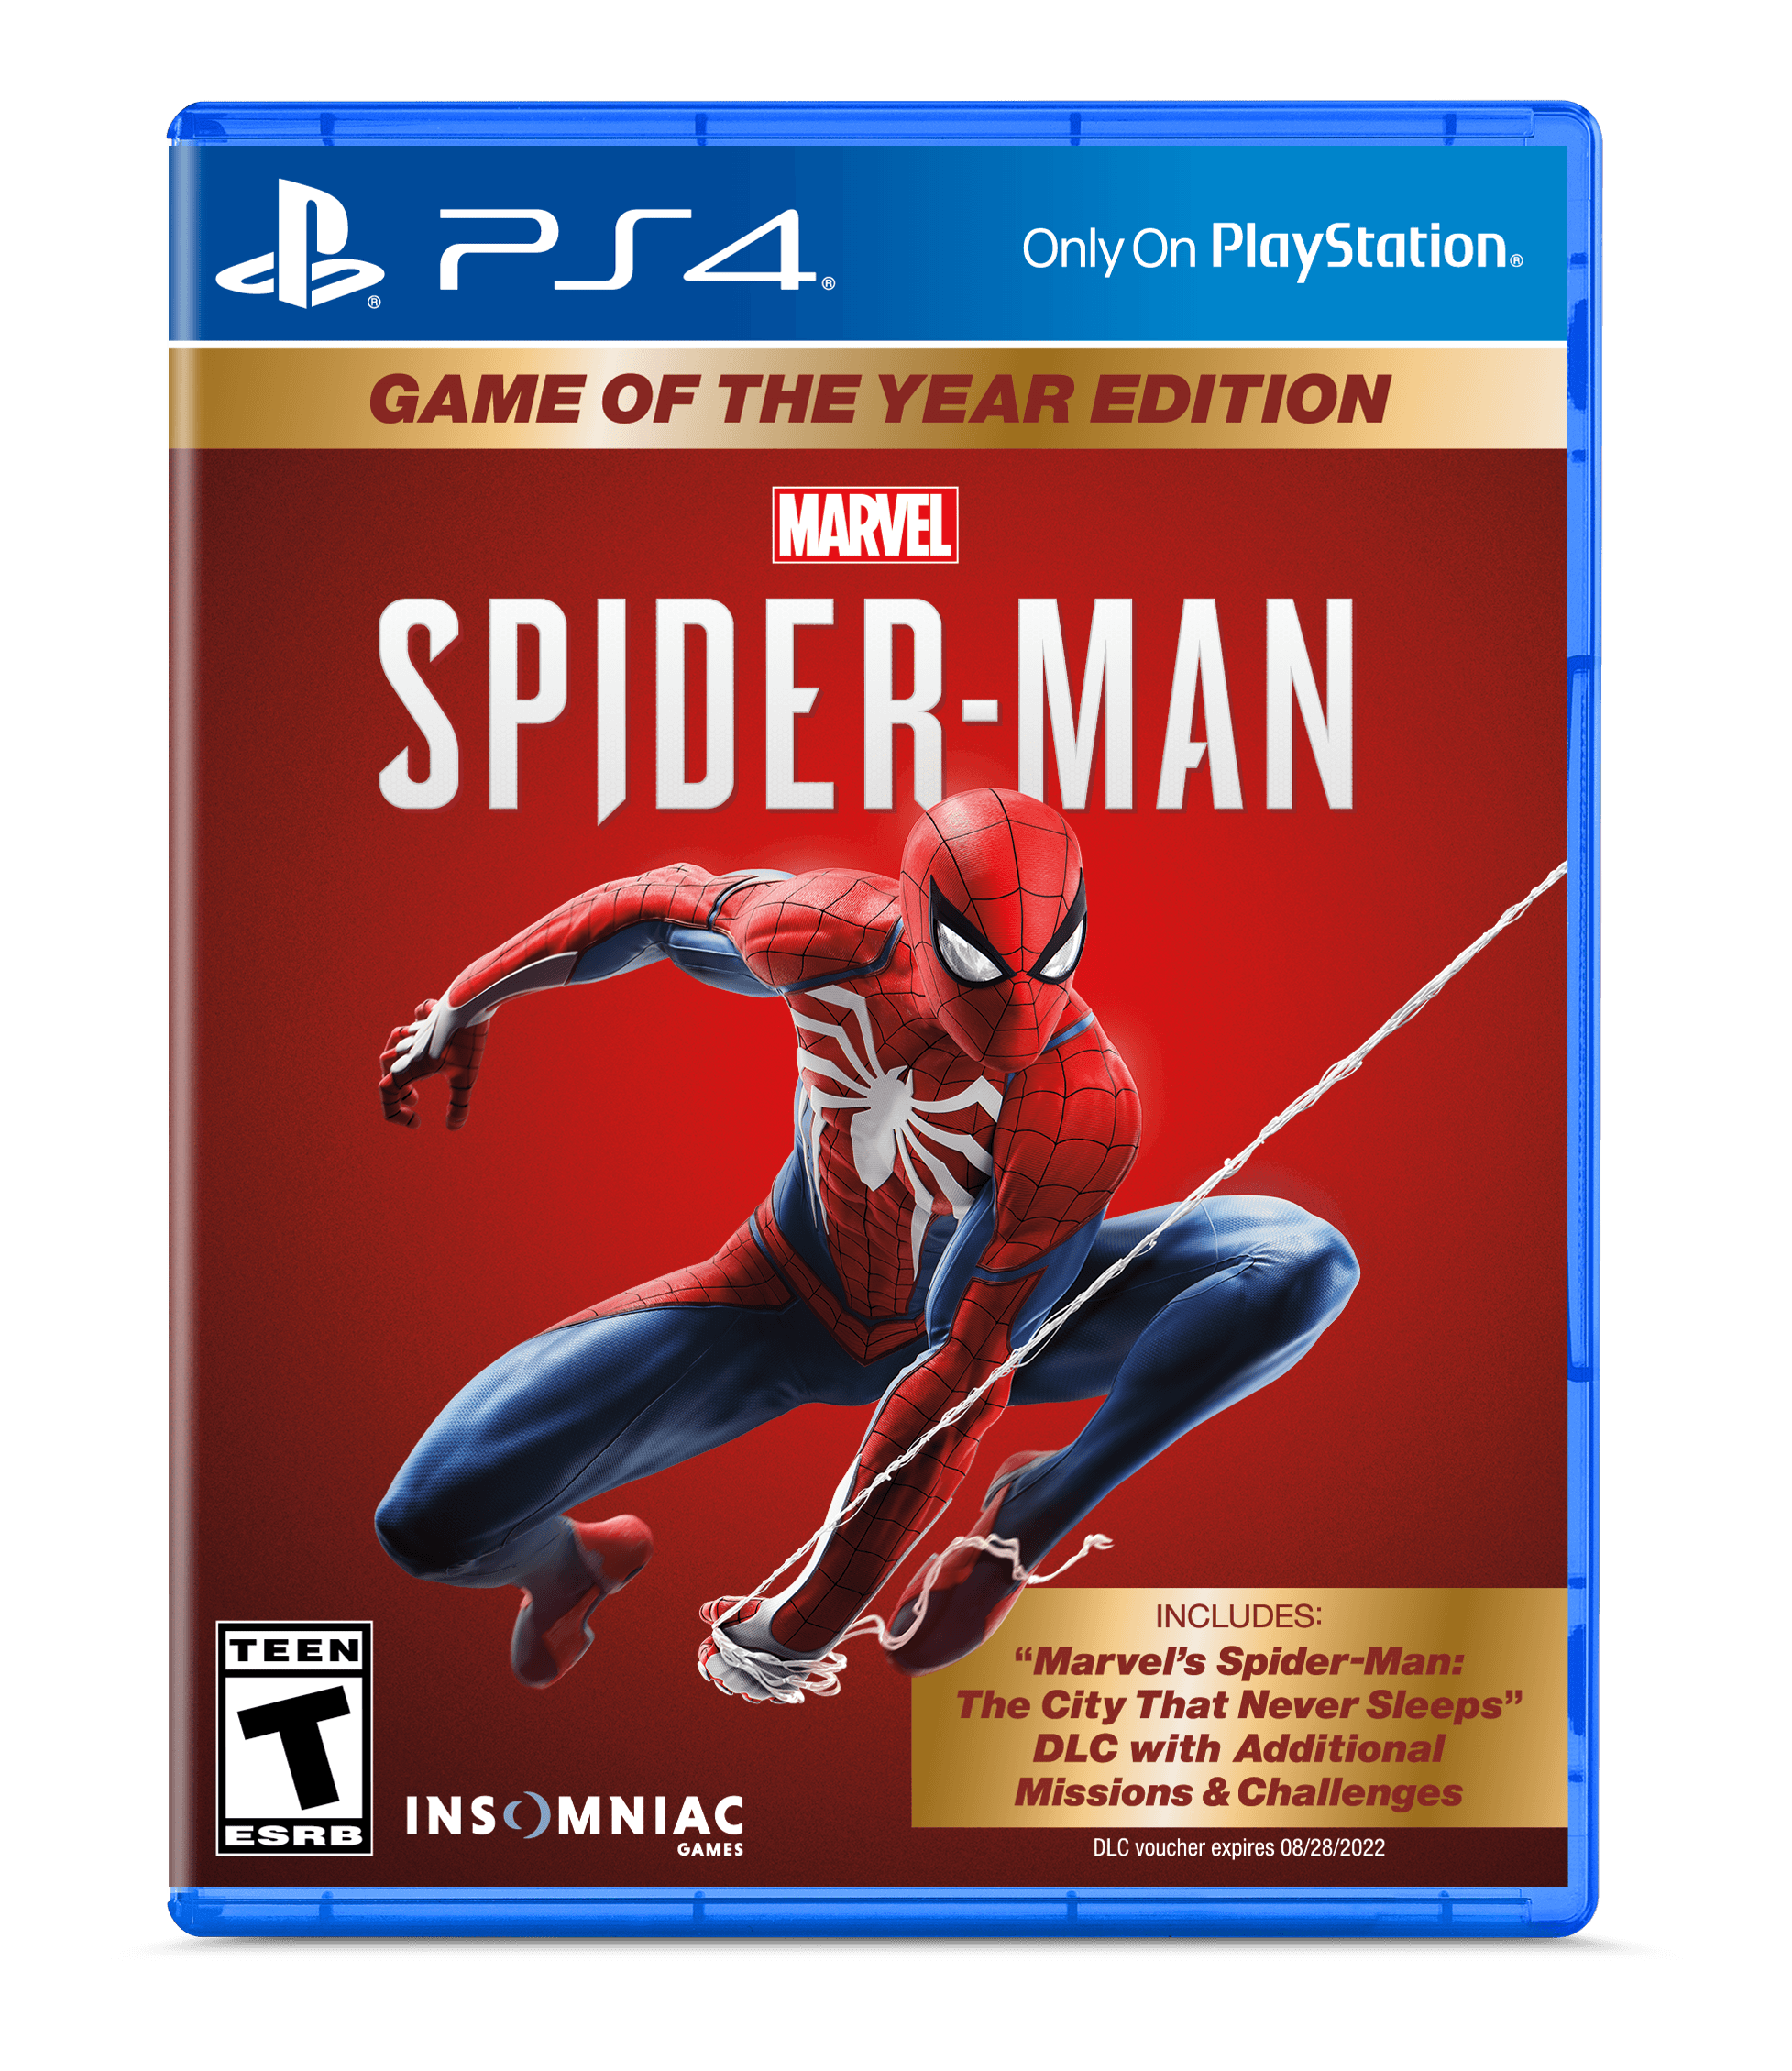 Marvel's Spider-Man: Game of the Year Edition - PlayStation 4 - image 1 of 3